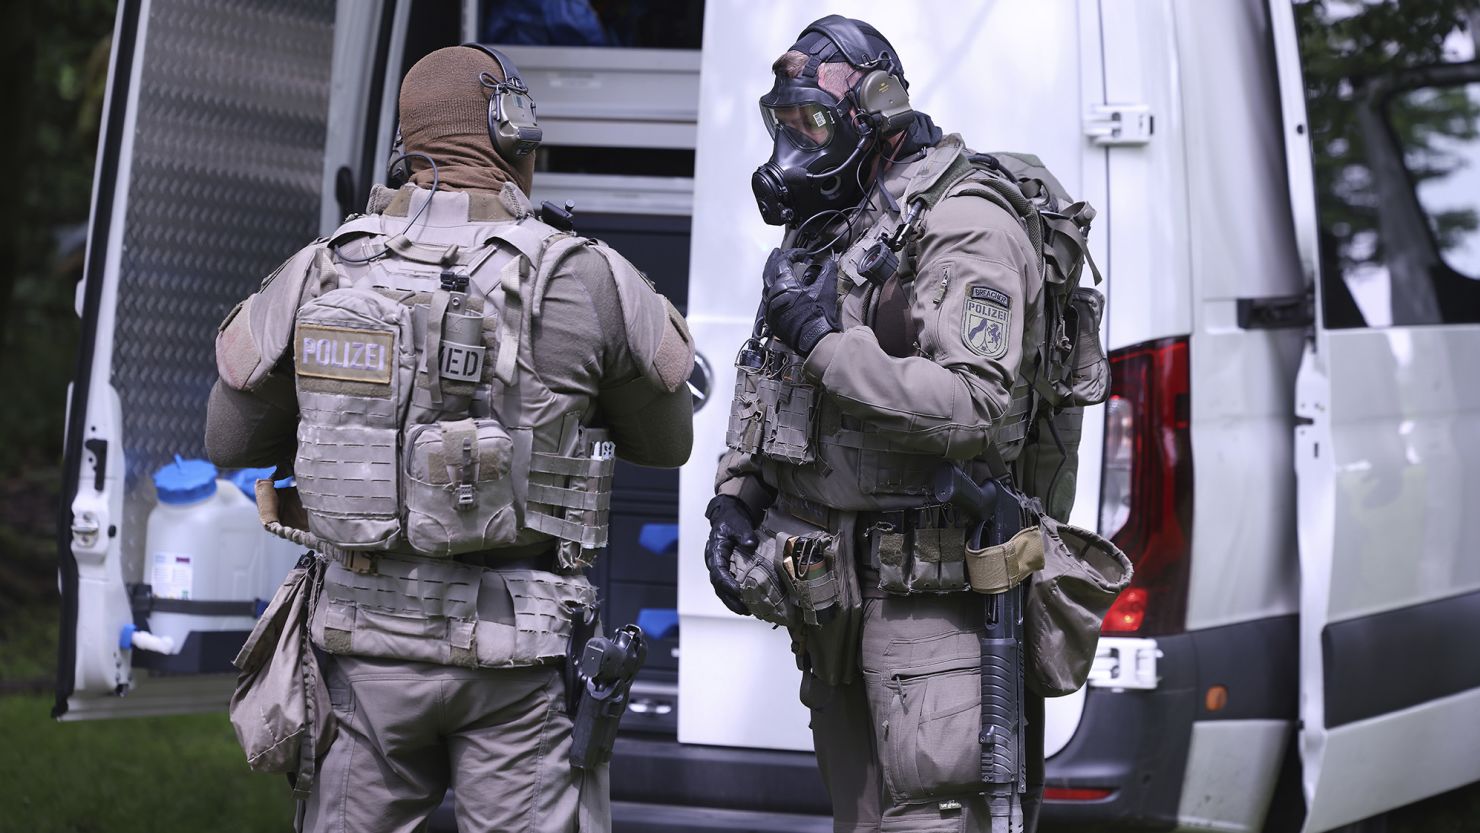 A police officer wearing a gas mask stands next to a colleague in front of a high-rise building in Ratingen on Thursday morning.